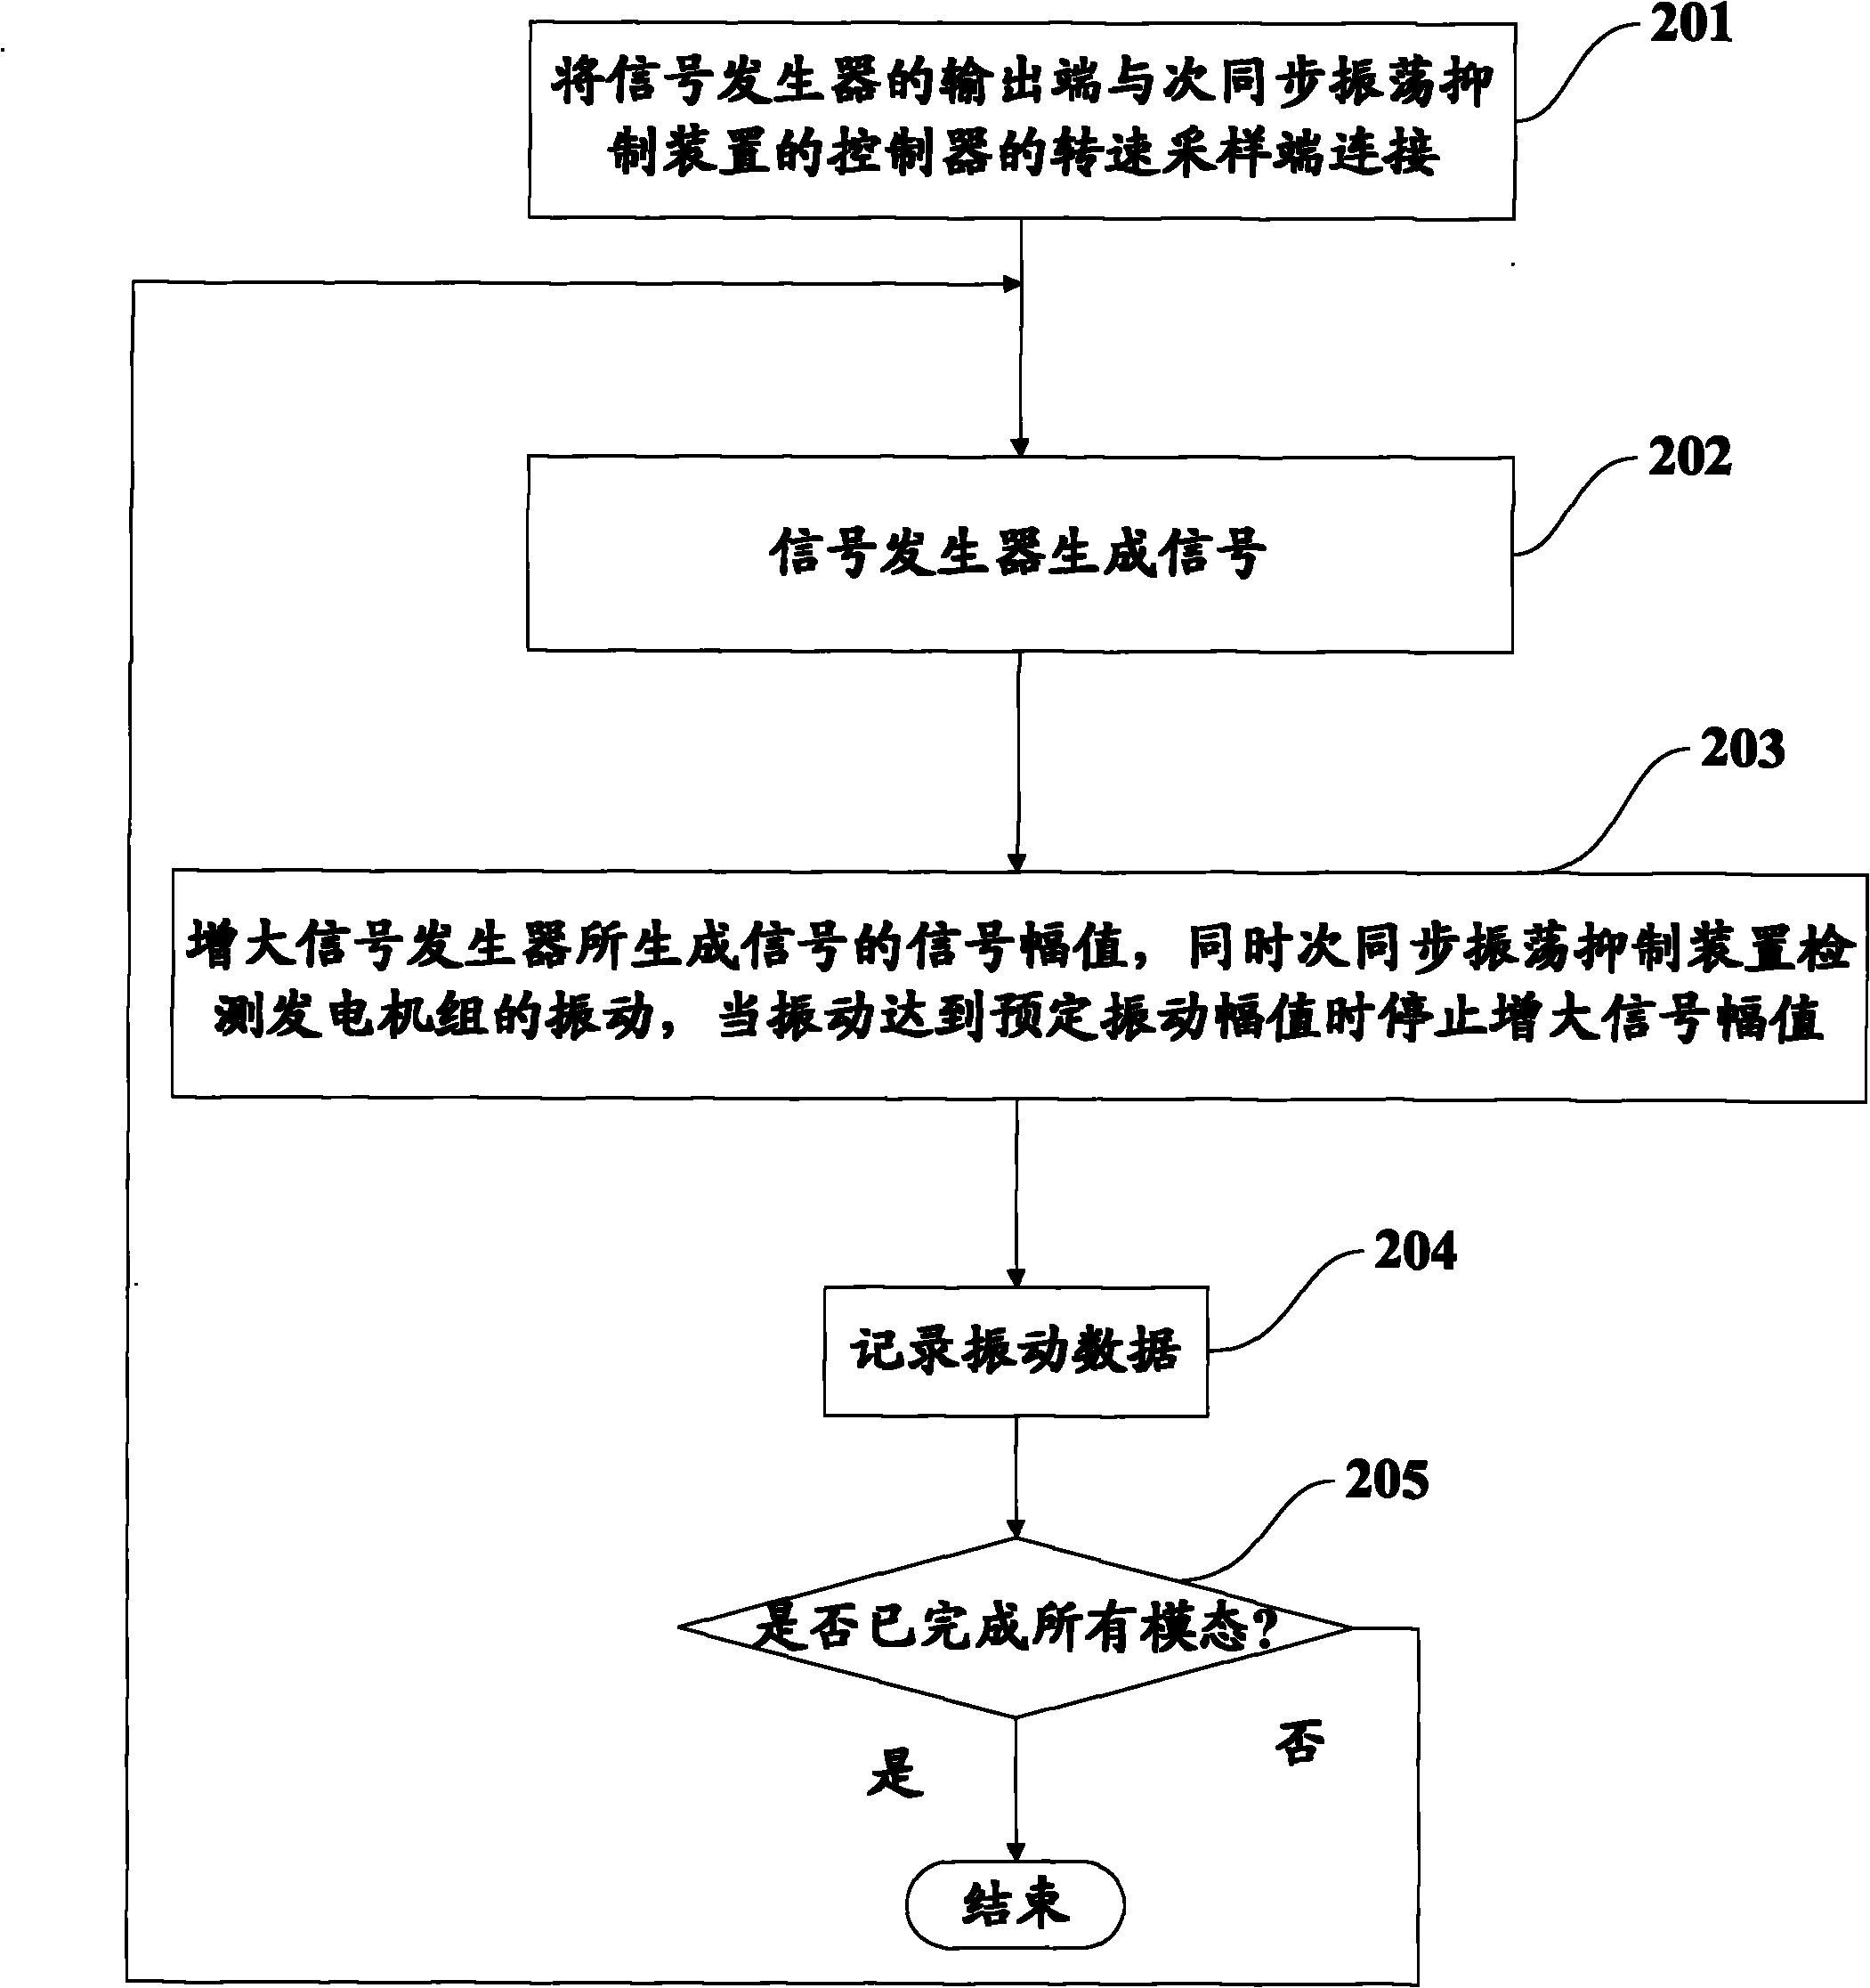 Method for exciting subsynchronous oscillation of generator set by utilizing subsynchronous oscillation suppression device